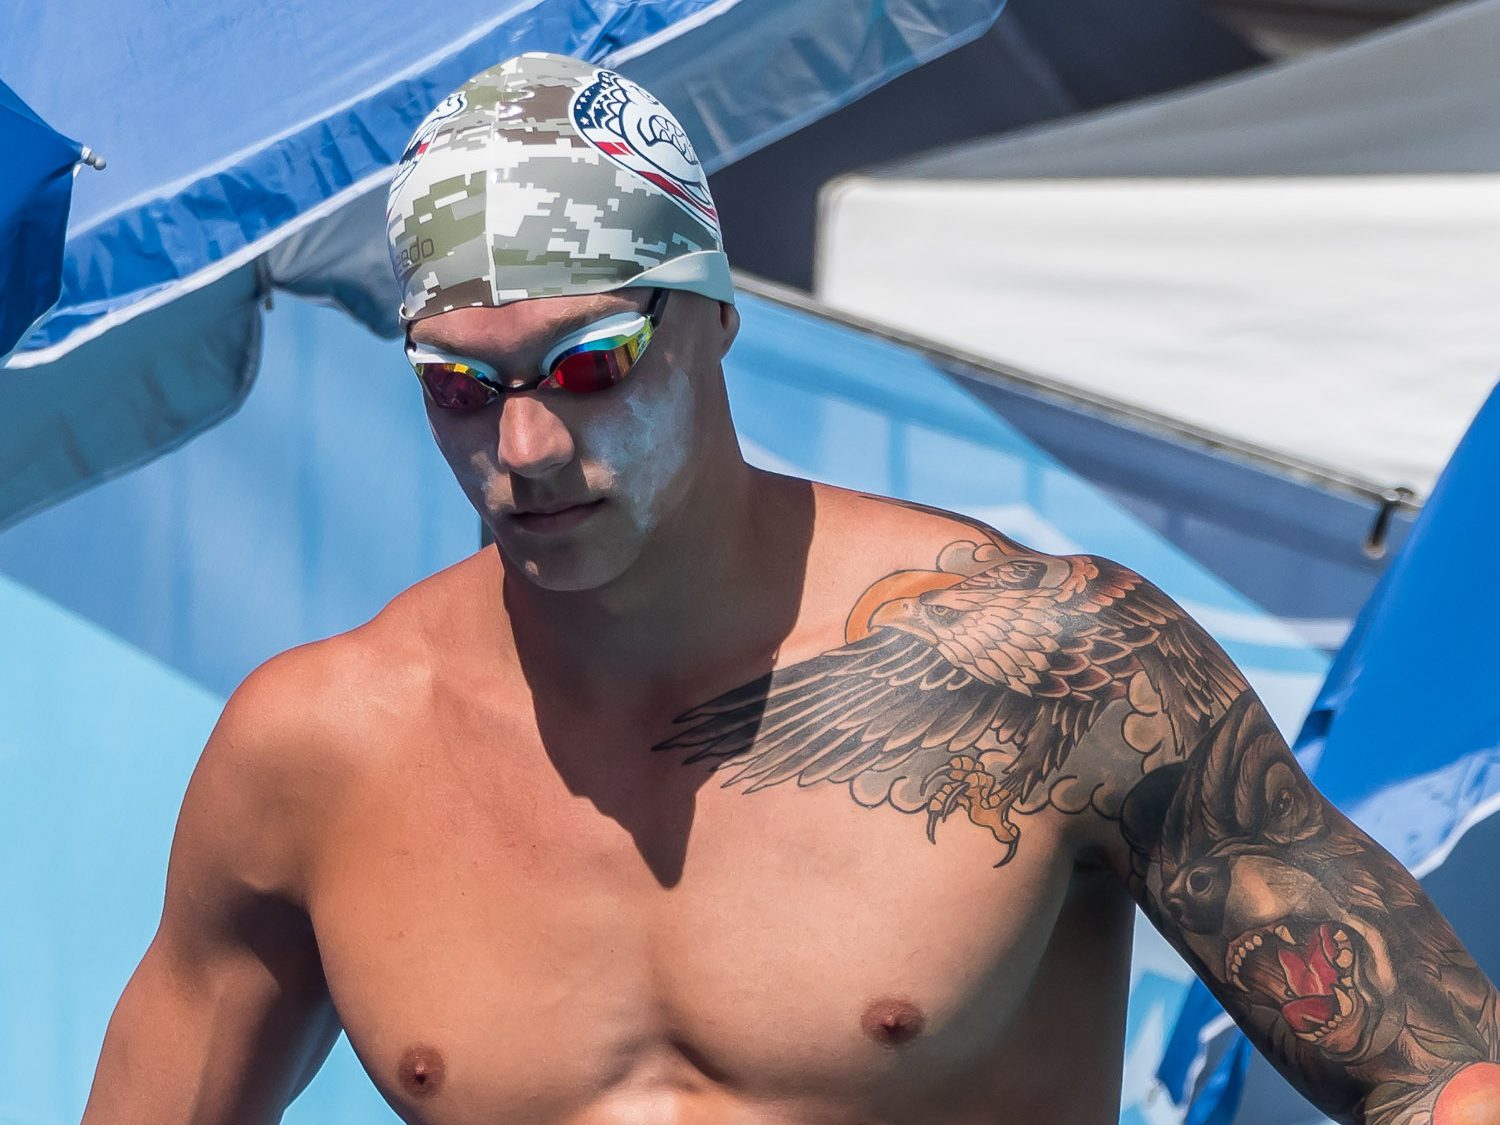 Caeleb Dressel Hurt in Motorcycle Accident in June, Almost Missed Nats